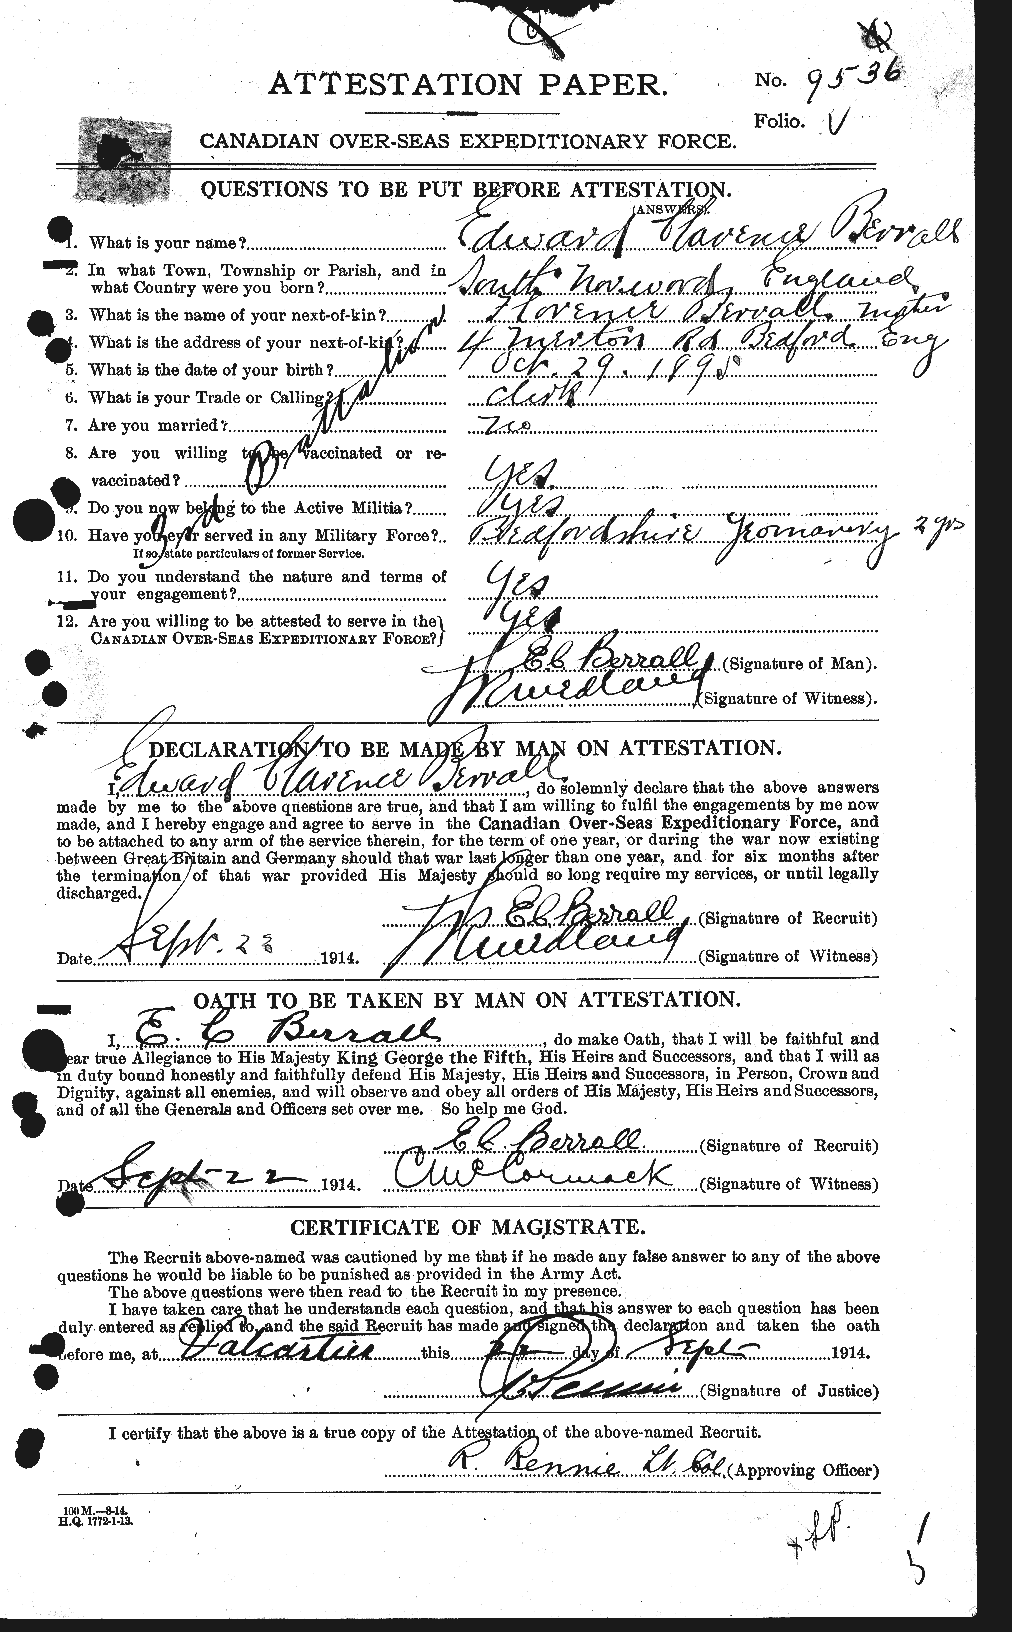 Personnel Records of the First World War - CEF 239827a